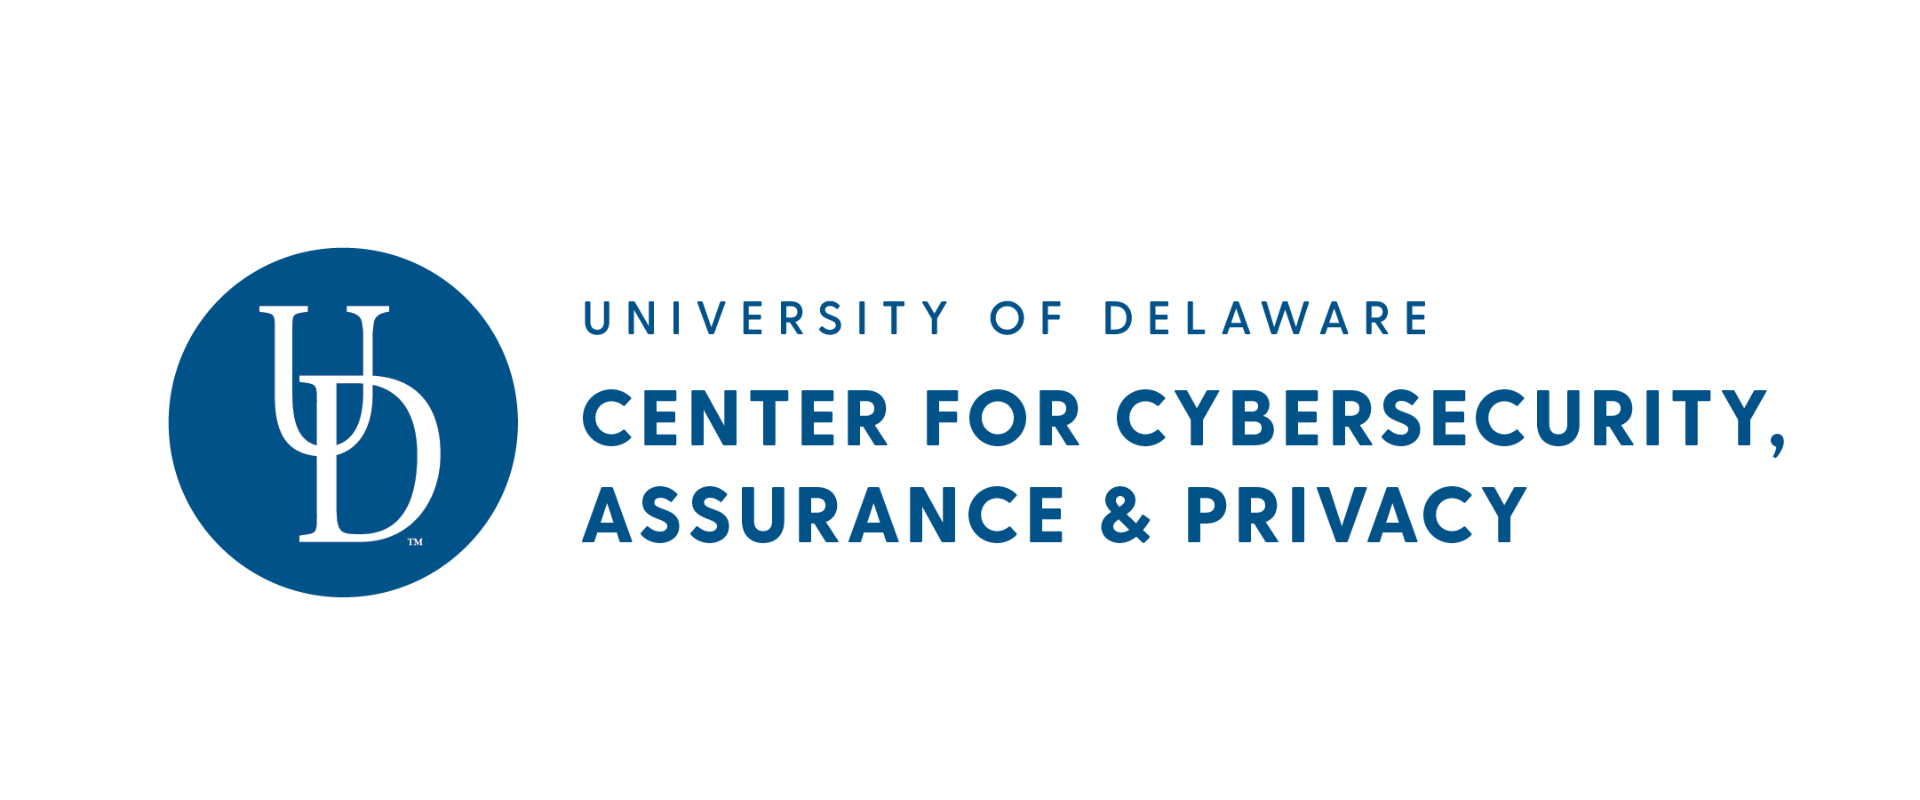 Center for Cybersecurity, Assurance & Privacy Logo